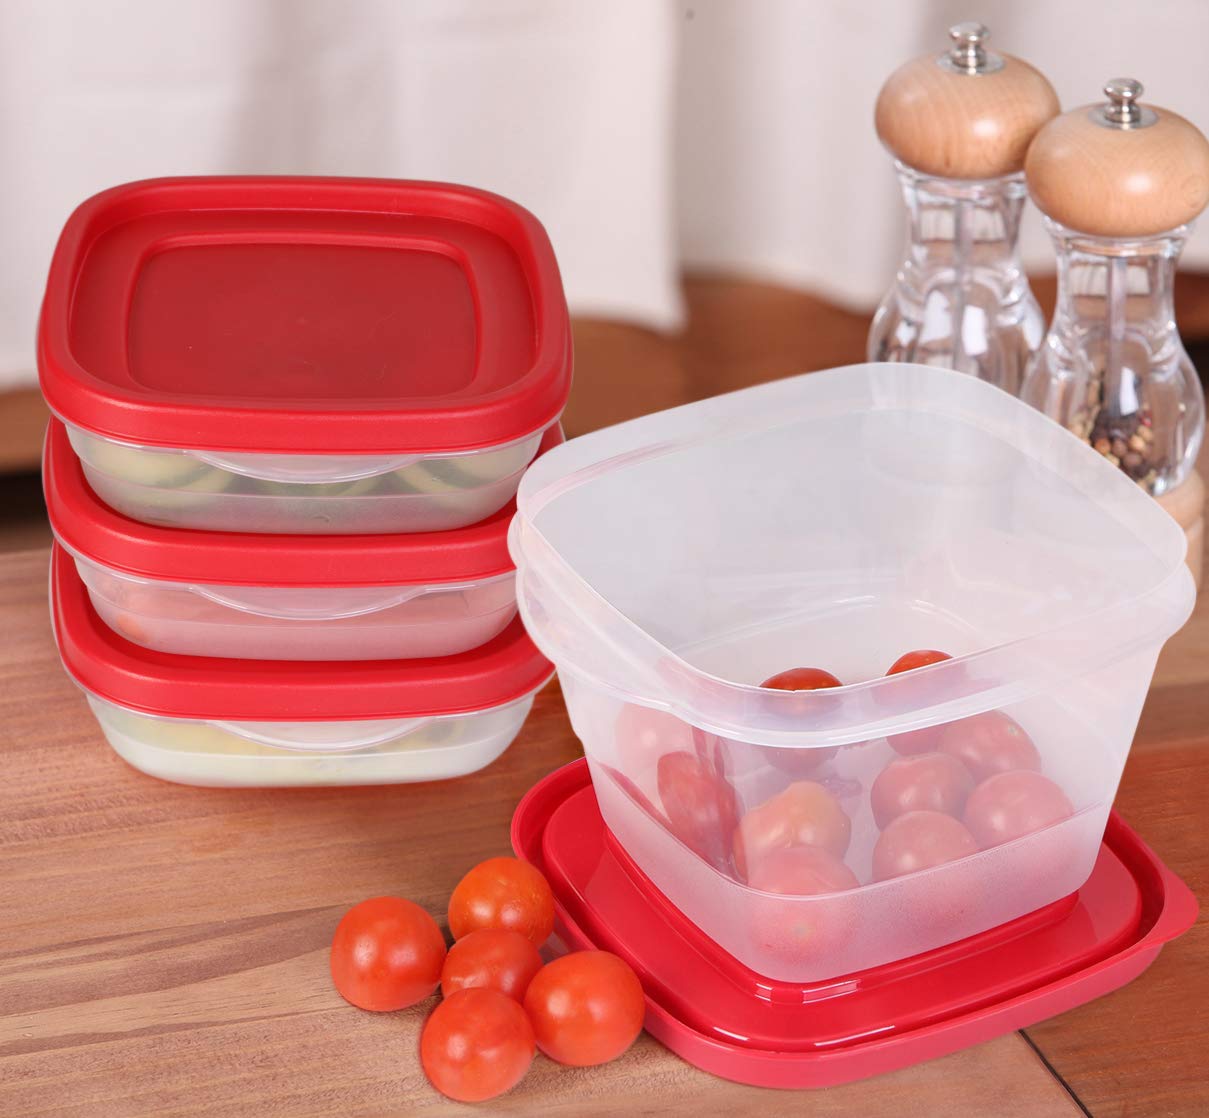 Are old plastic containers safe